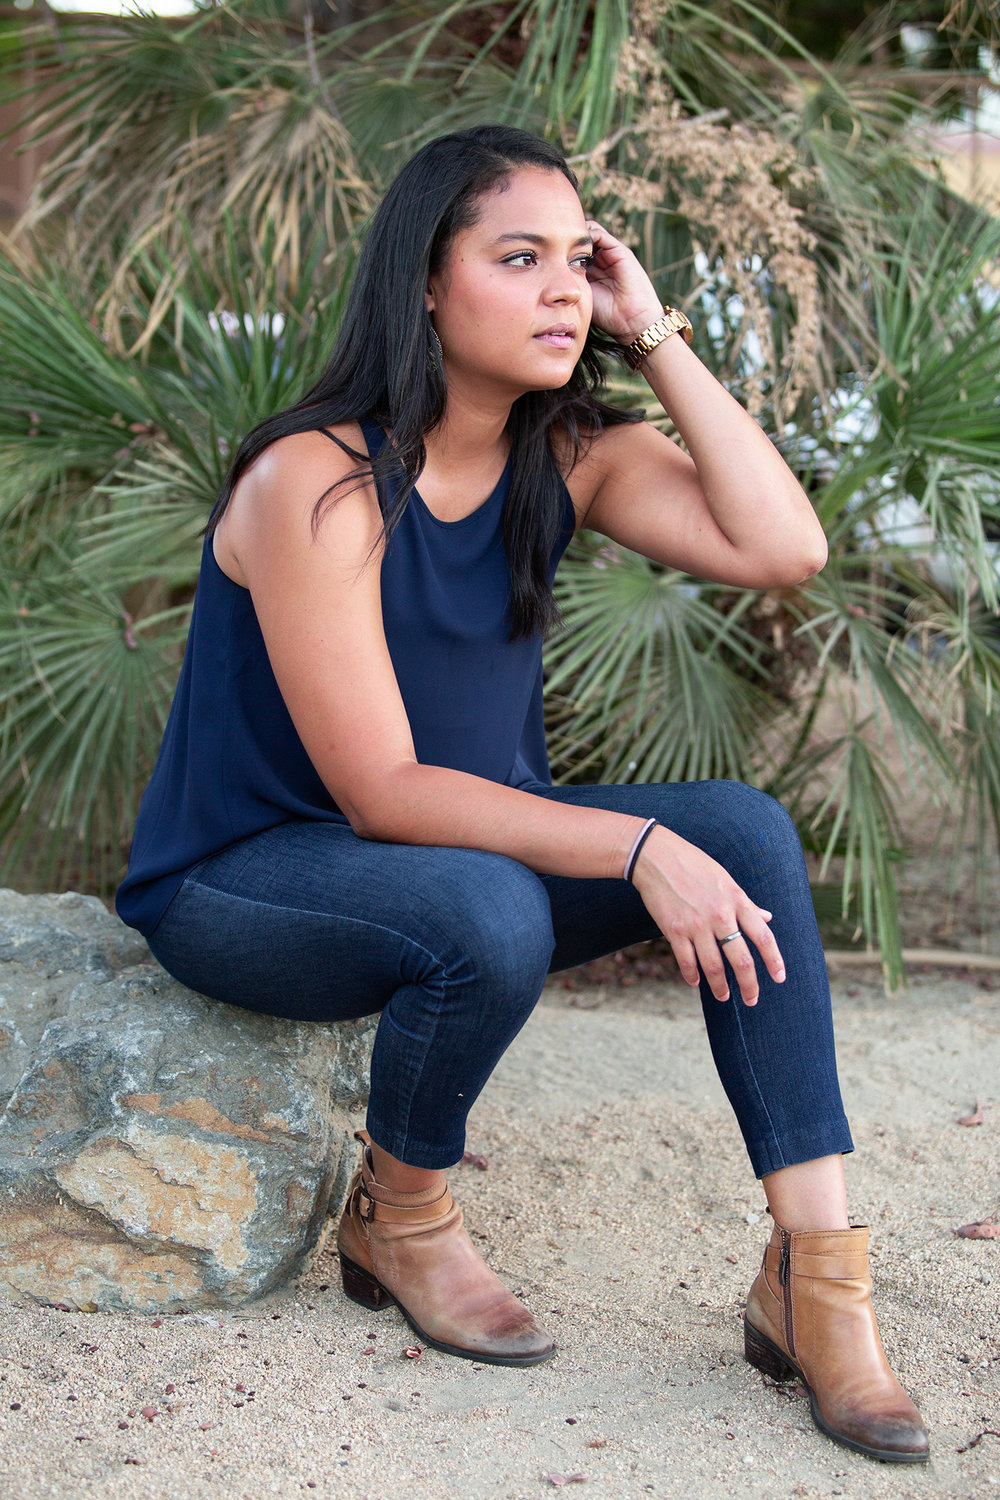 Edith Carolina Rojas sitting on a rock in a contemplative state.